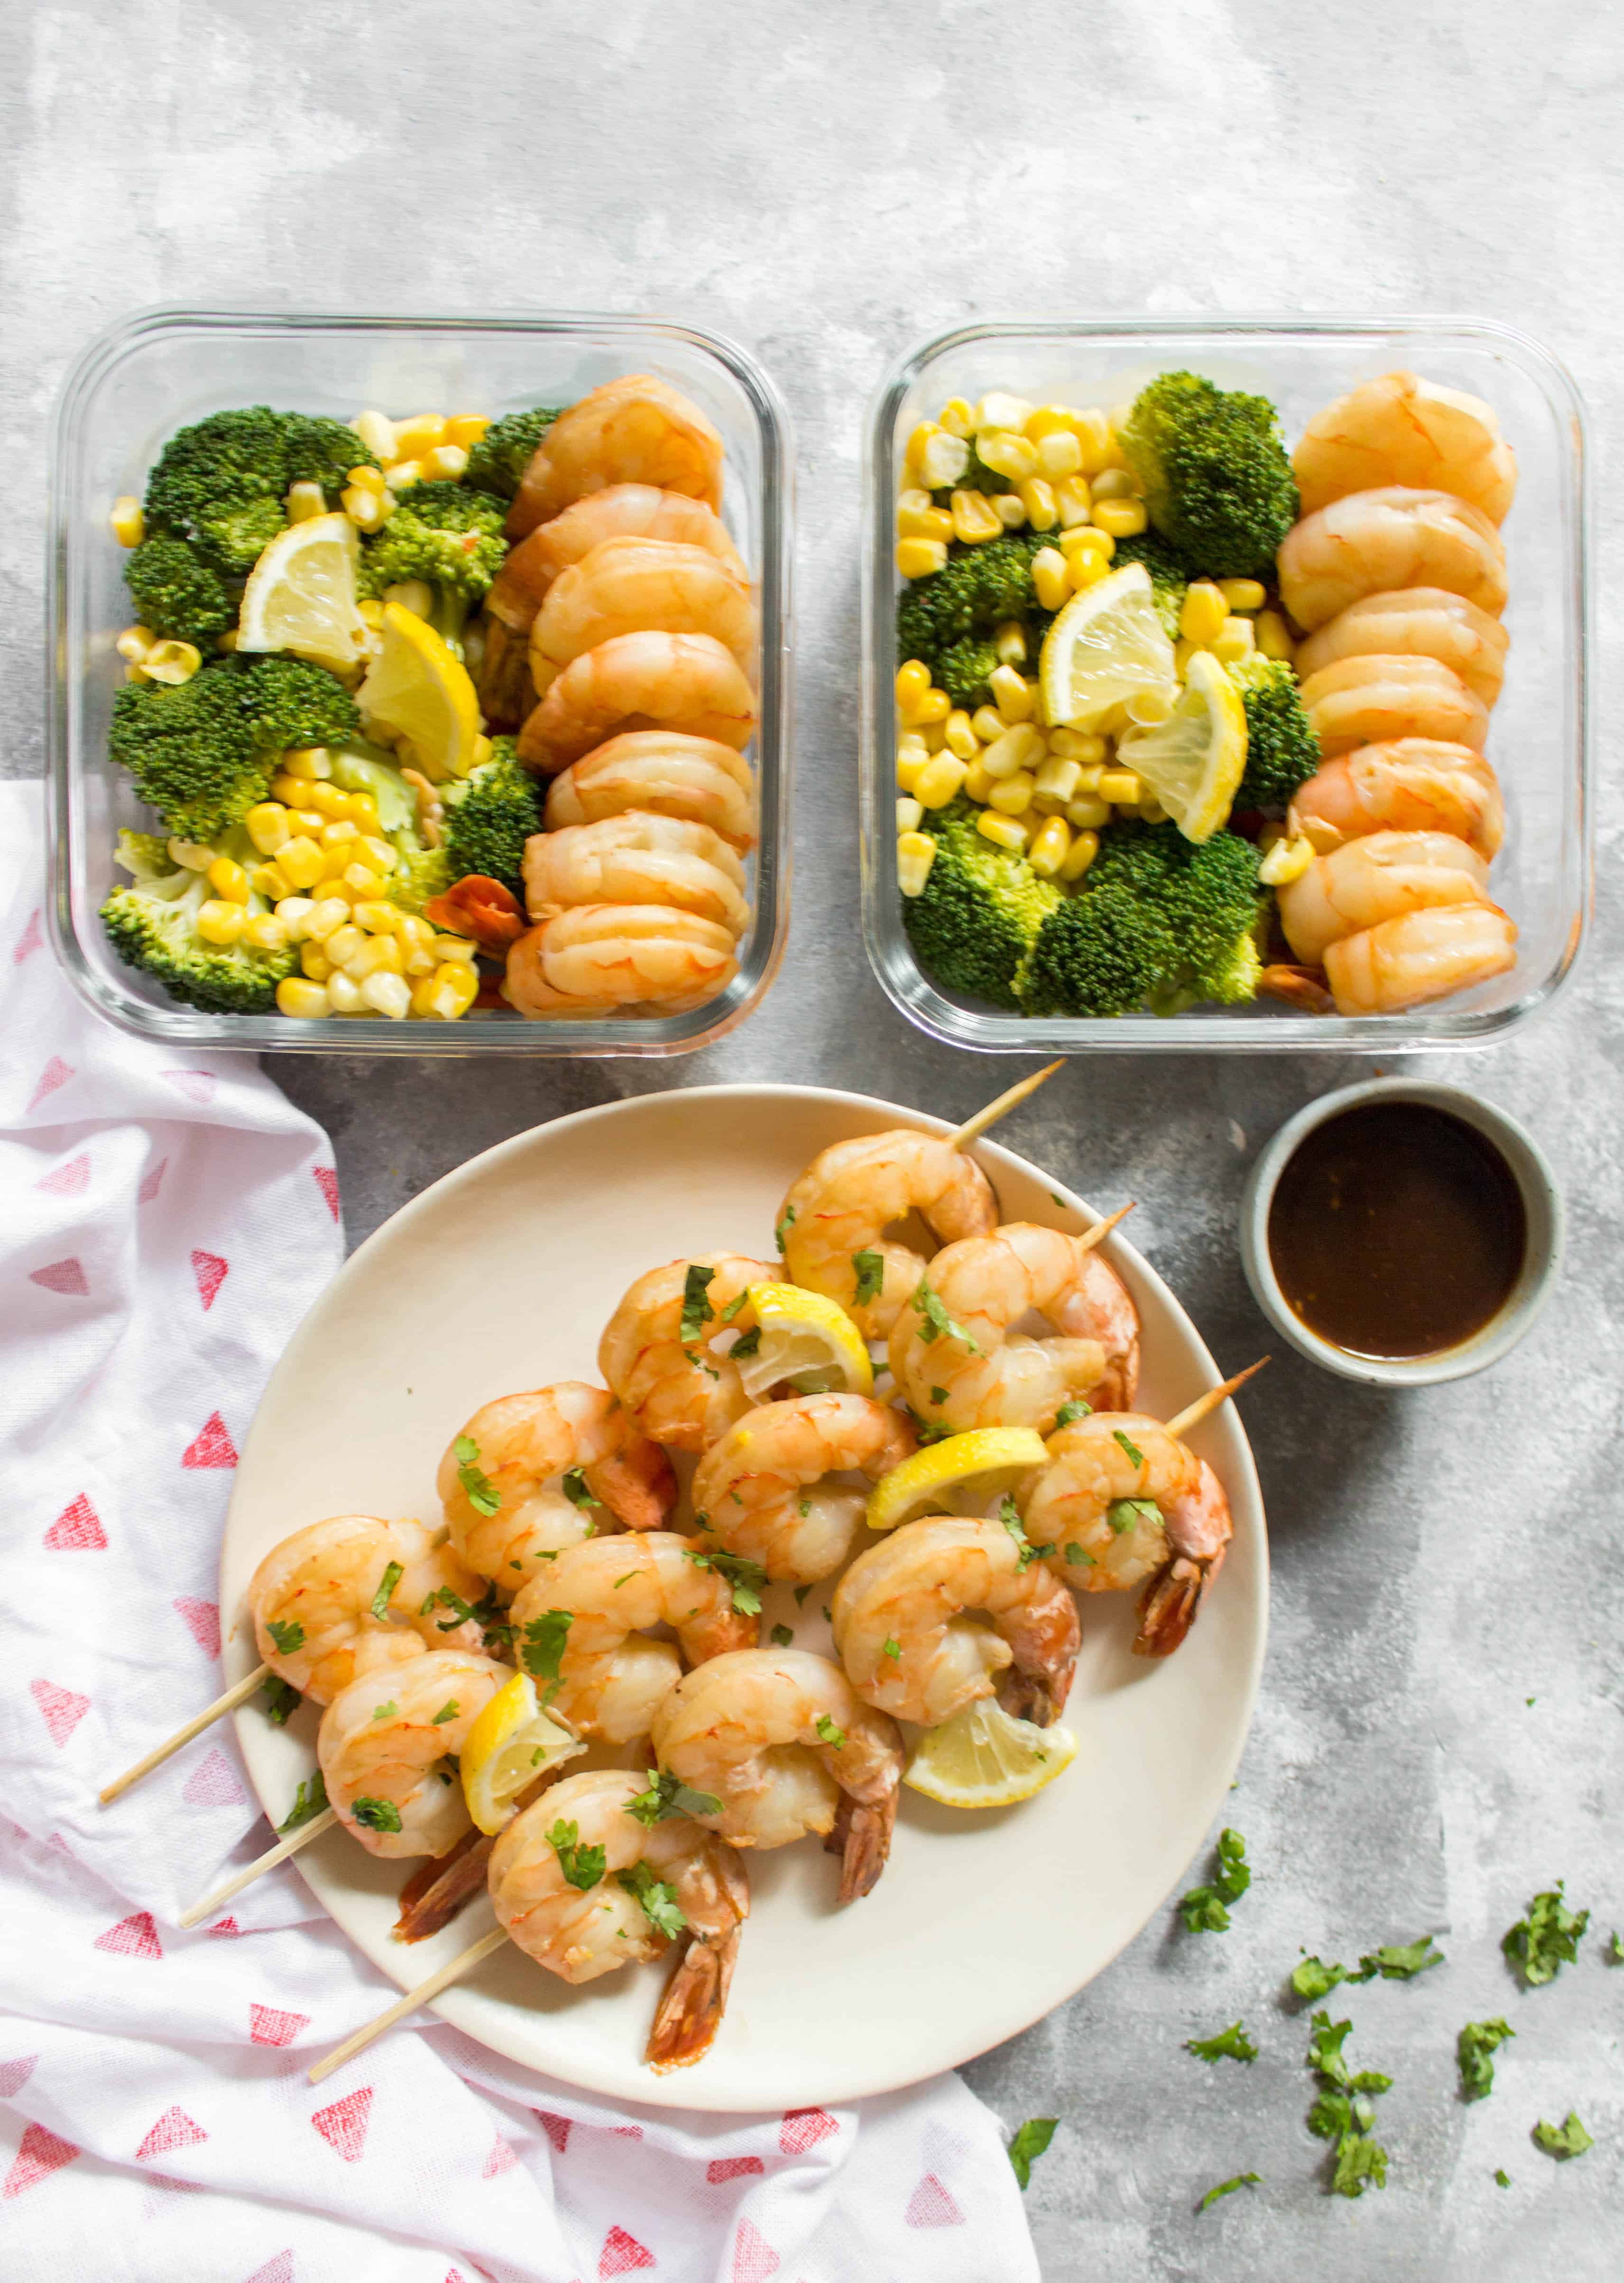 Cooked in under 10 minutes, this easy sweet lemon shrimp meal prep is packed with flavour. Marinate the shrimp overnight or for 30 minutes, and you've got yourself a delicious meal prep! Look no further for this week's meal prep than this sweet lemon shrimp recipe!